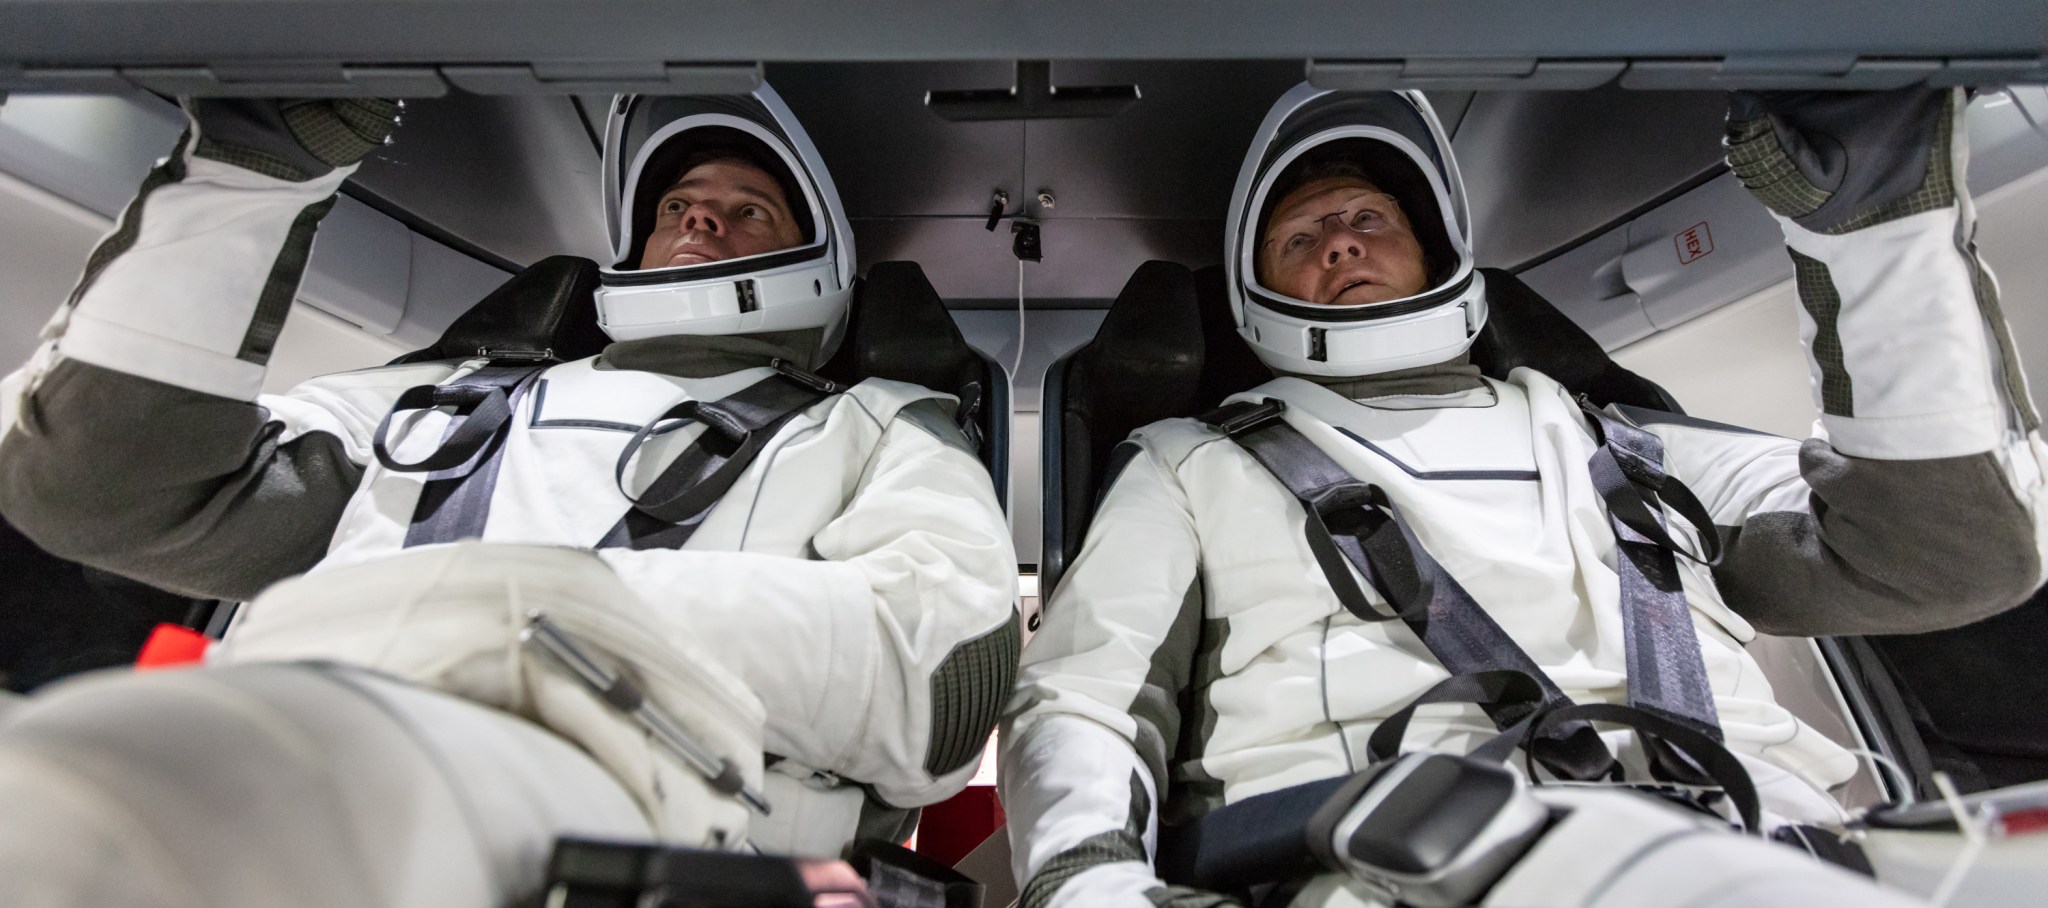 NASA astronauts Doug Hurley and Bob Behnken familiarize themselves with SpaceX’s Crew Dragon